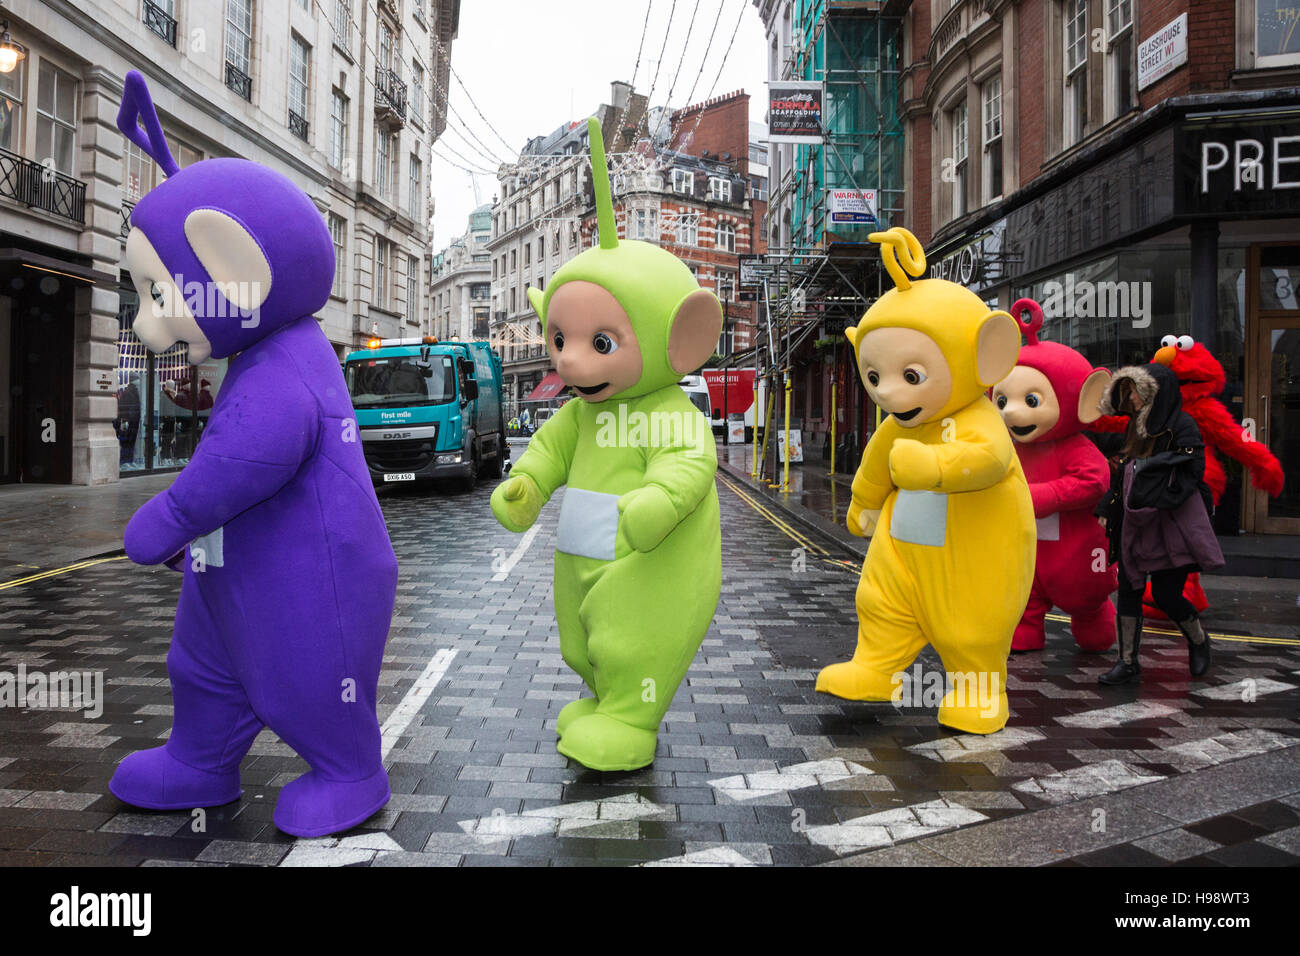 London, UK. 20 November 2016. Teletubbies on their way to the parade. The 2016 Hamleys Christmas Toy Parade takes place along Regent Street, which went traffic-free for the day. The parade organised by the world-famous toy store Hamleys featured over many of the nation's favourite children's characters along with entertainers, a marching band and giant balloons. The parade is modelled on Macy's annual Thanksgiving Parade in New York. Credit:  Bettina Strenske/Alamy Live News Stock Photo